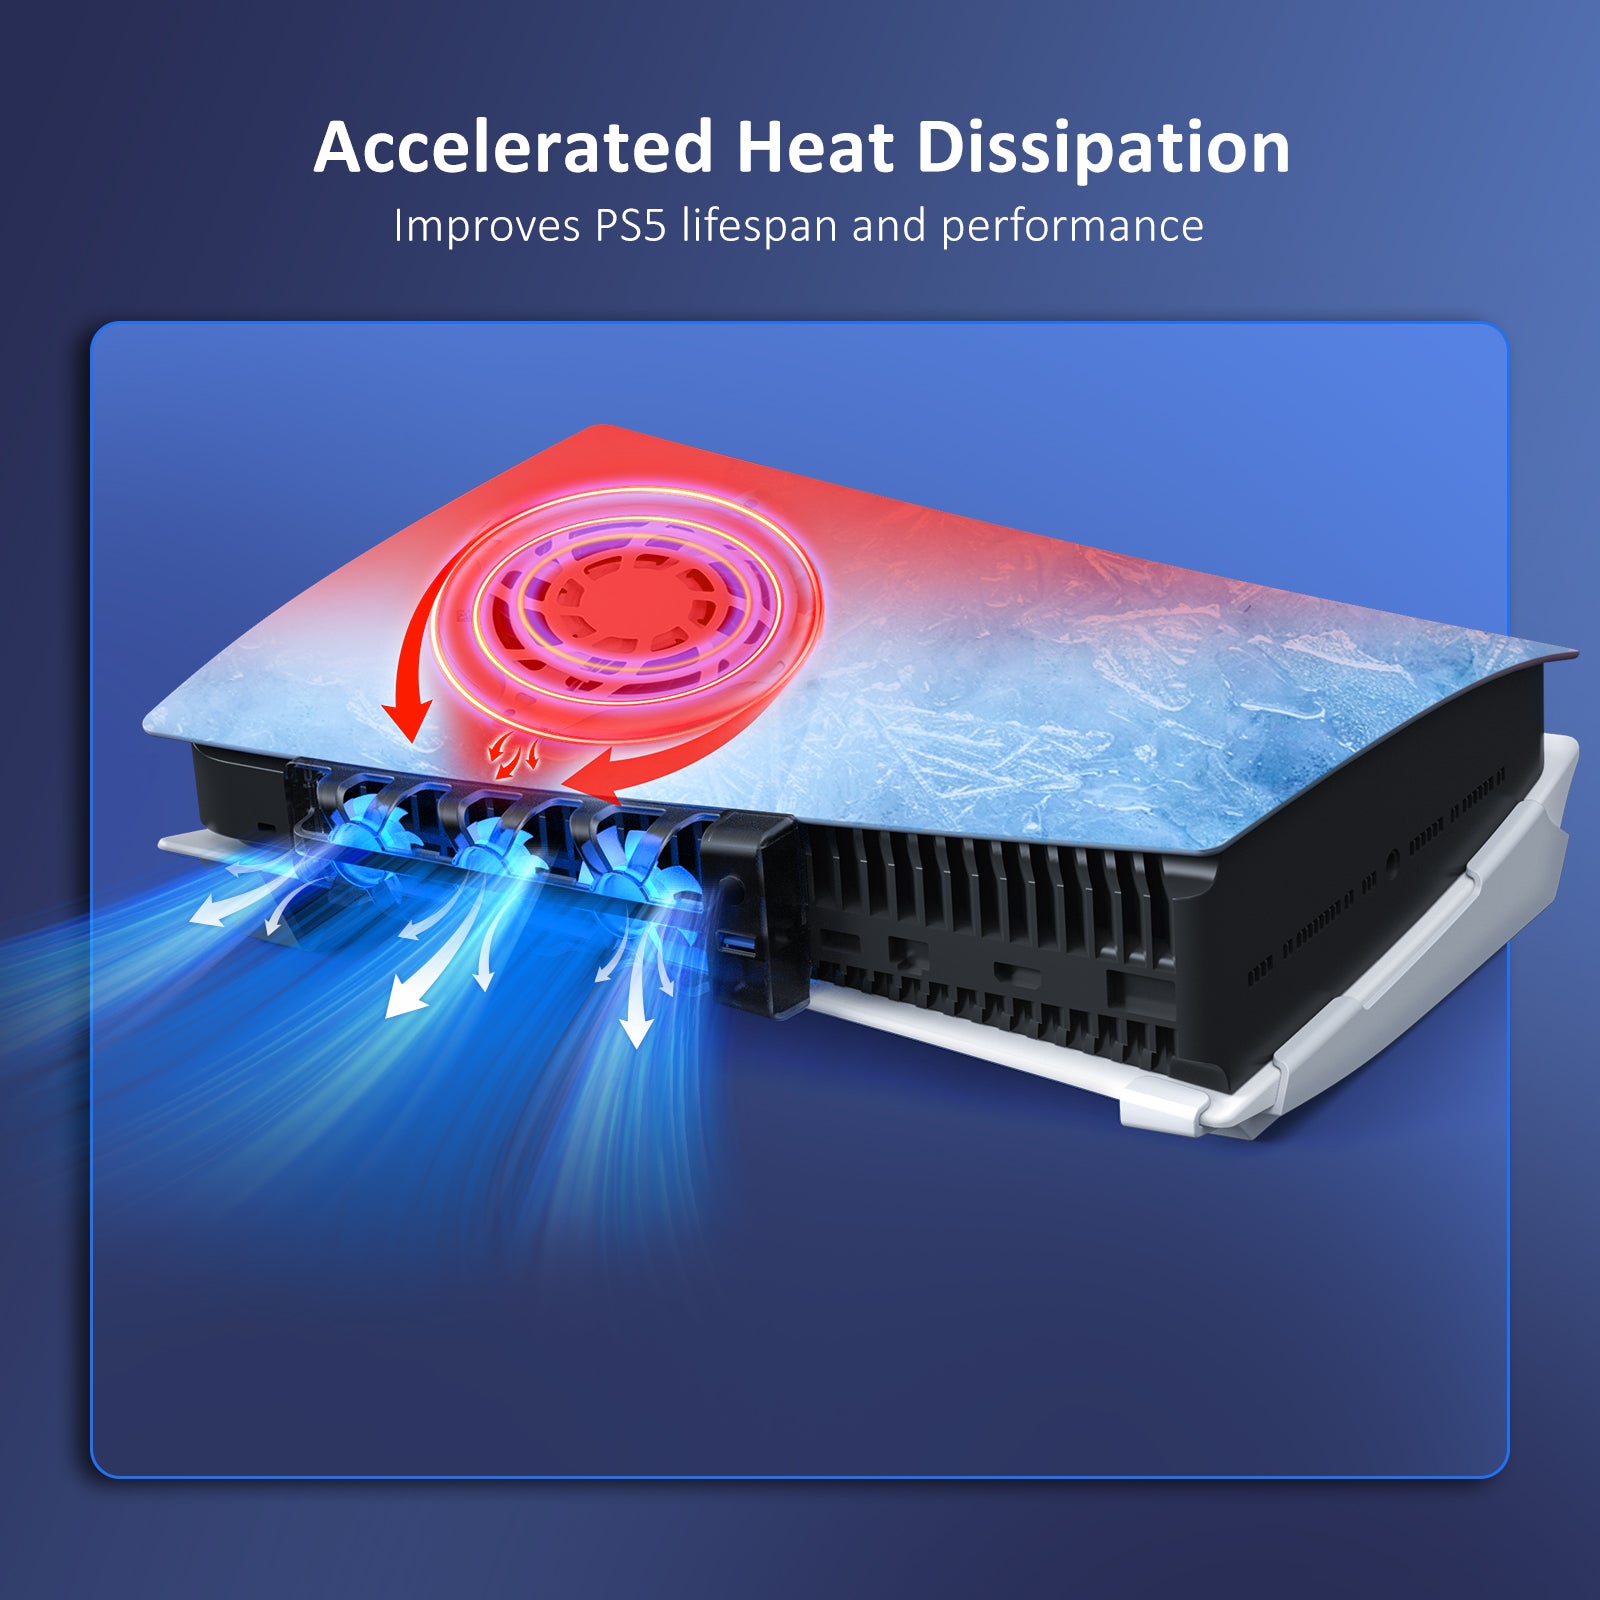 The cooling fan is accelerating heat dissipation for the PS5 console.